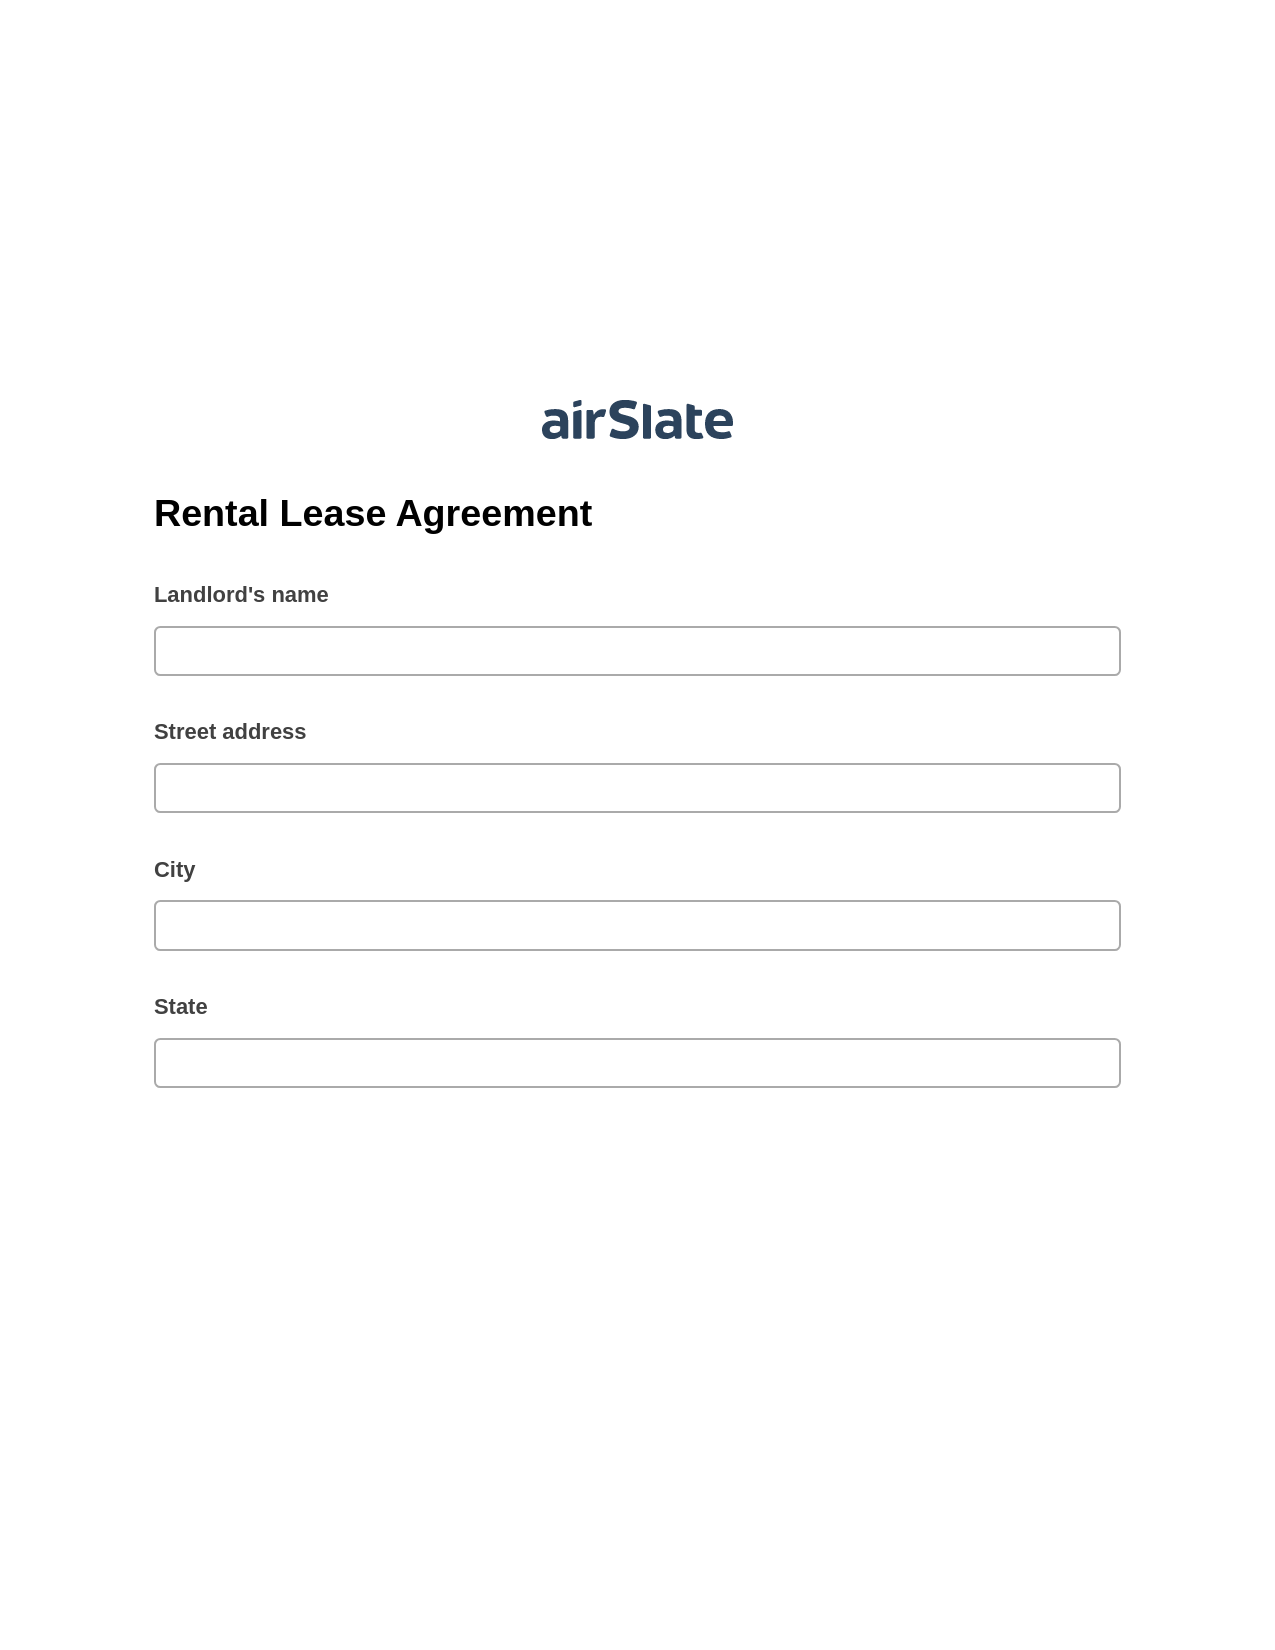 Rental Lease Agreement Pre-fill from Google Sheet Dropdown Options Bot, Create MS Dynamics 365 Records Bot, Dropbox Bot